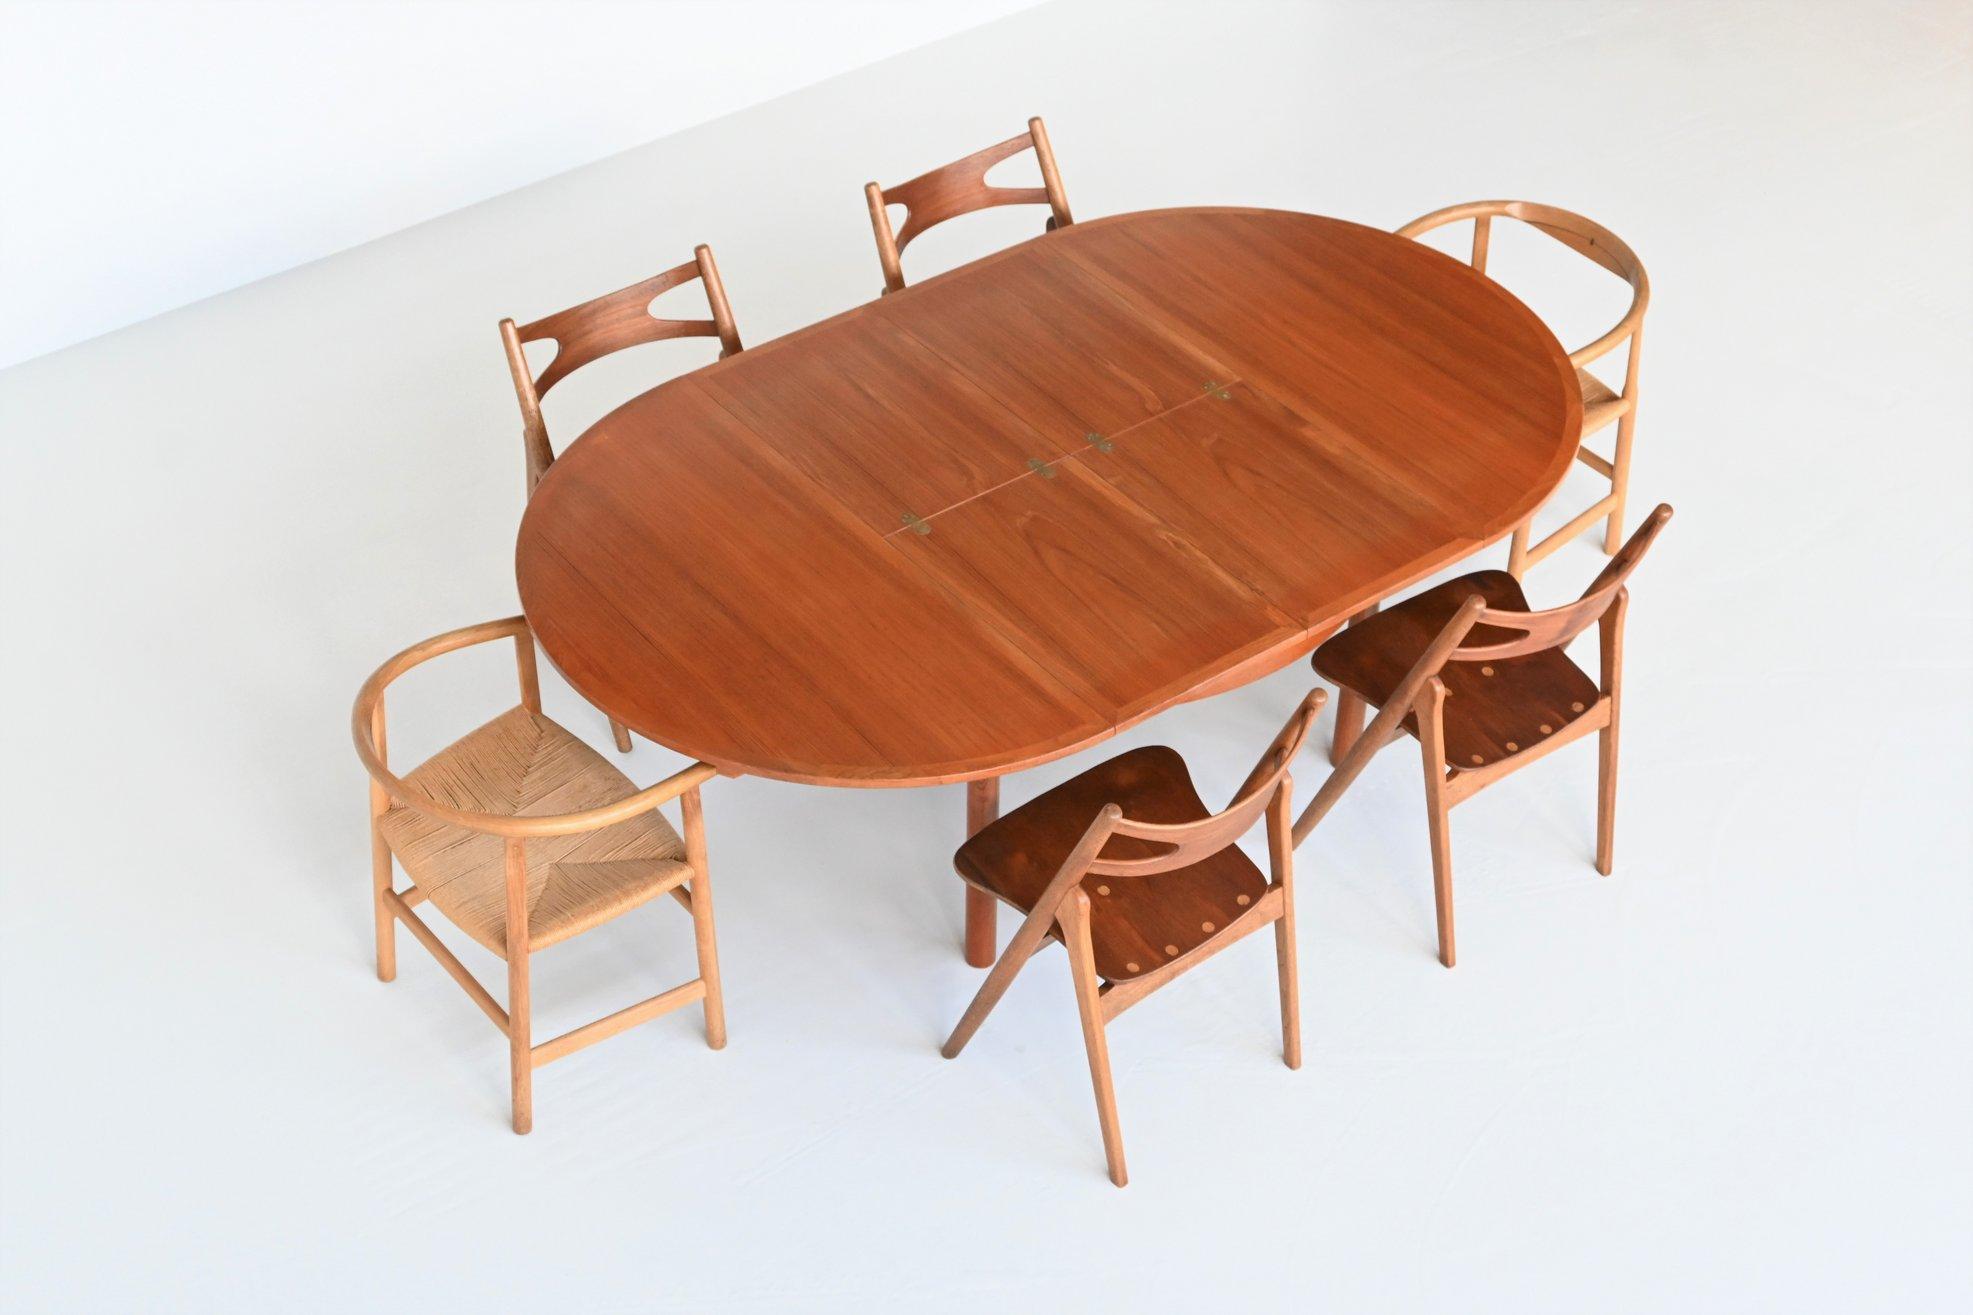 Gorgeous large extendable dining table model 140 designed by Borge Mogensen for Karl Andersson, Denmark 1955. The table is 130 cm round and extendable using two extension leaves up to a length of 216 cm. It is made of teak wood and has nice brass